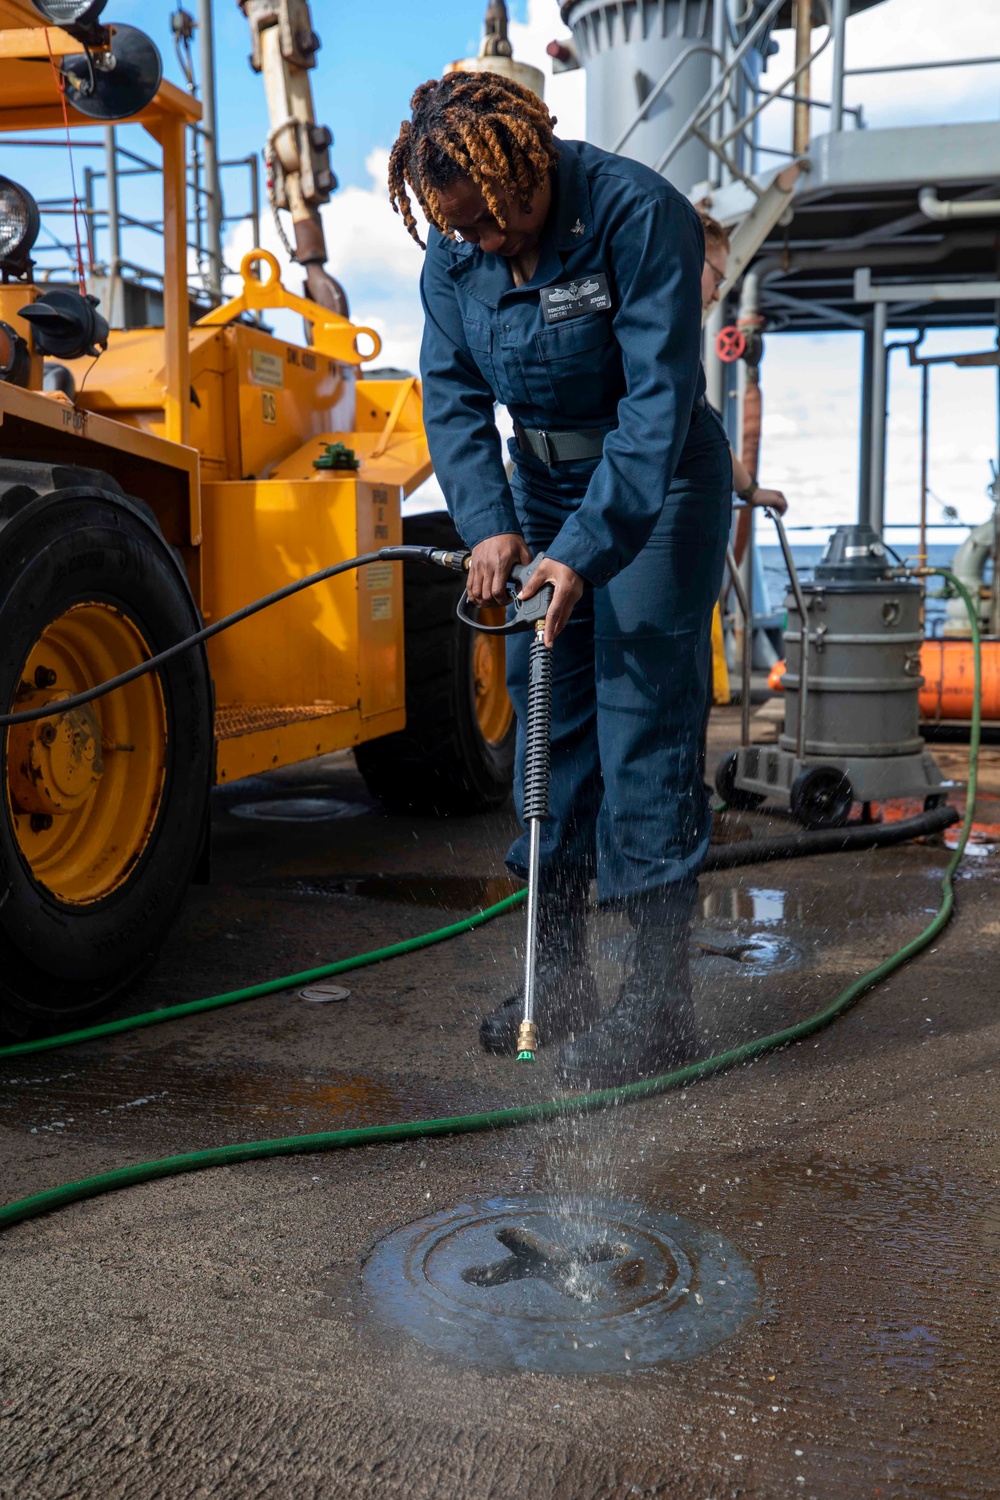 U.S. Navy Boatswain’s Mate Power-Washes the Deck